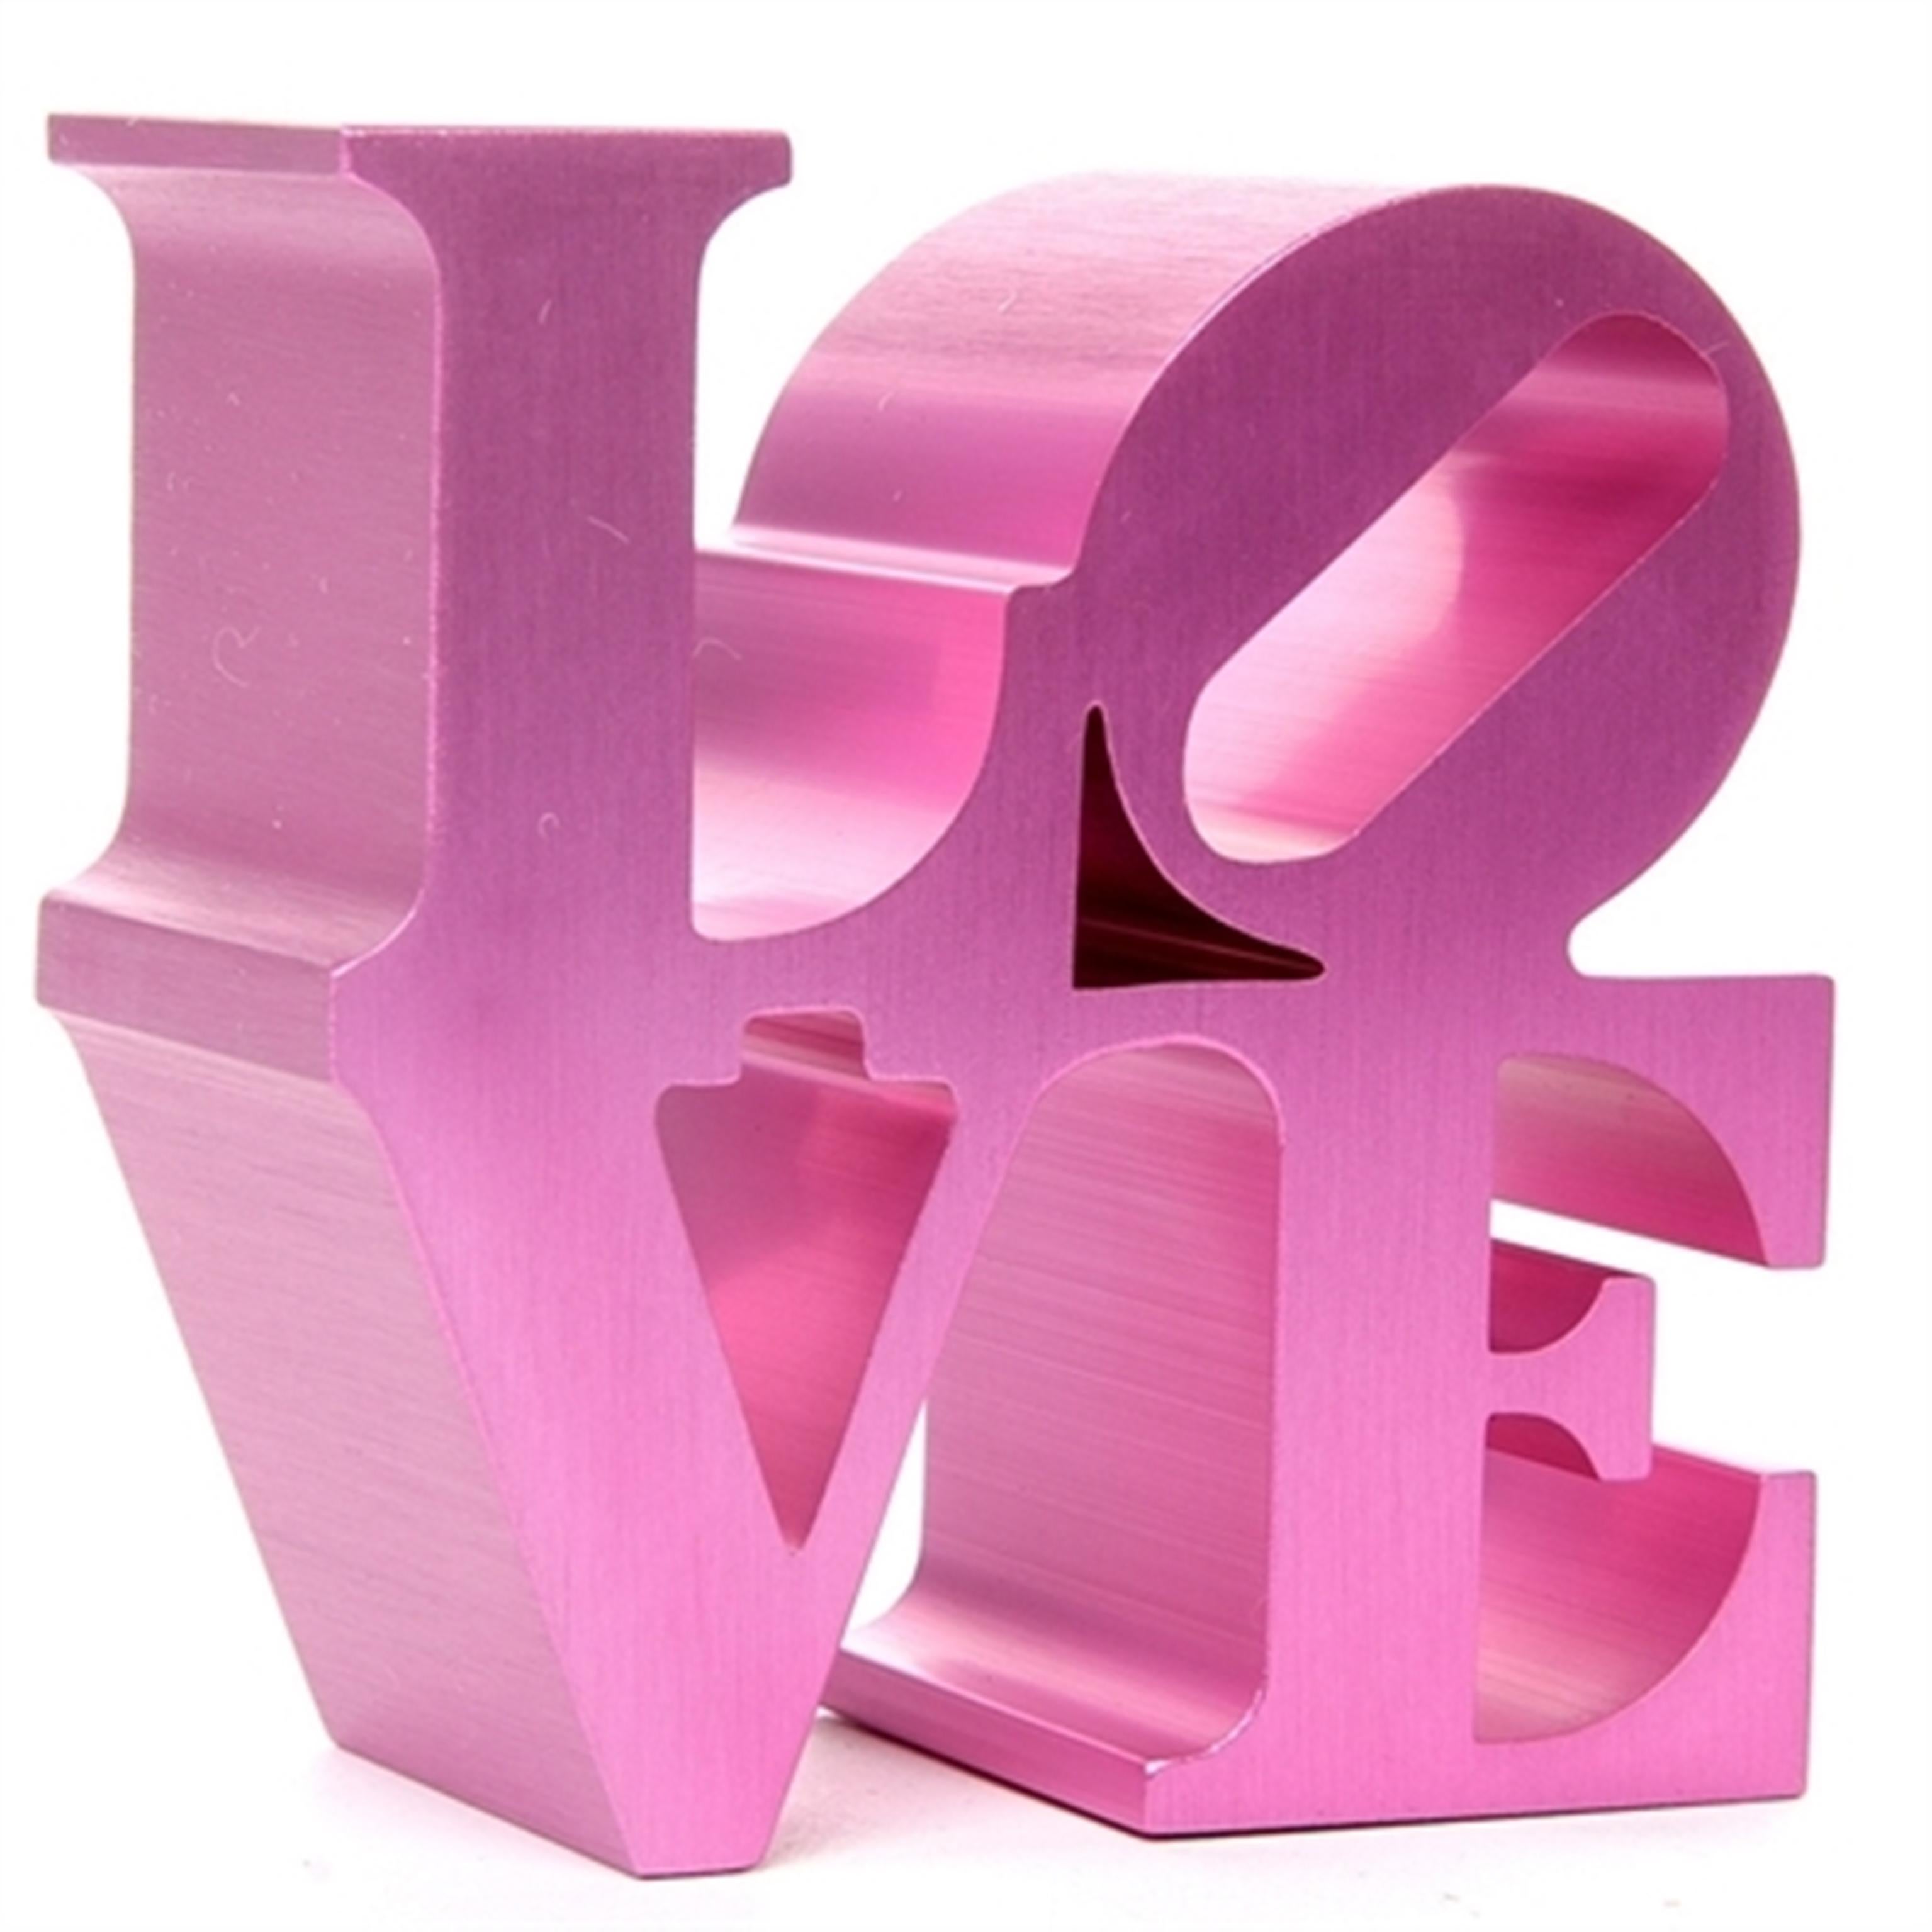 LOVE (Pink) sculpture, official replica with Indianapolis Museum of Art stamp  - Sculpture by Robert Indiana